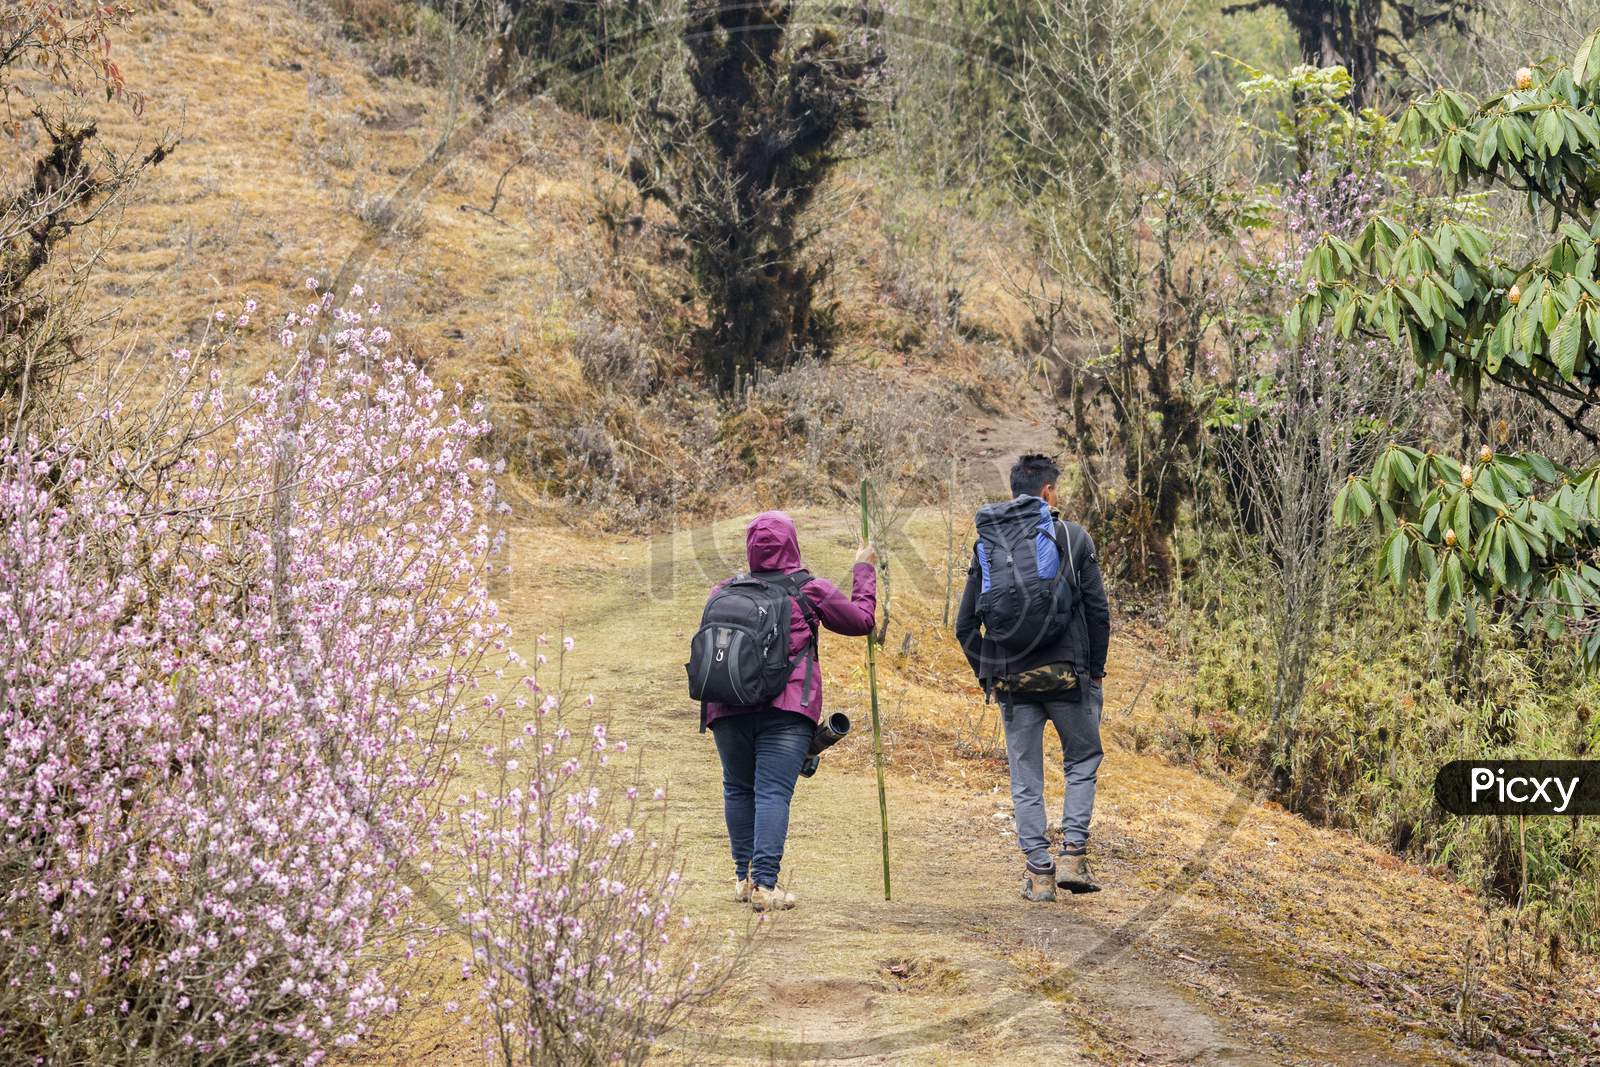 Two Travellers On Their Trekking On The Way To Sandakphu, West Bengal, India With A Bamboo Stick In Theior Hand.